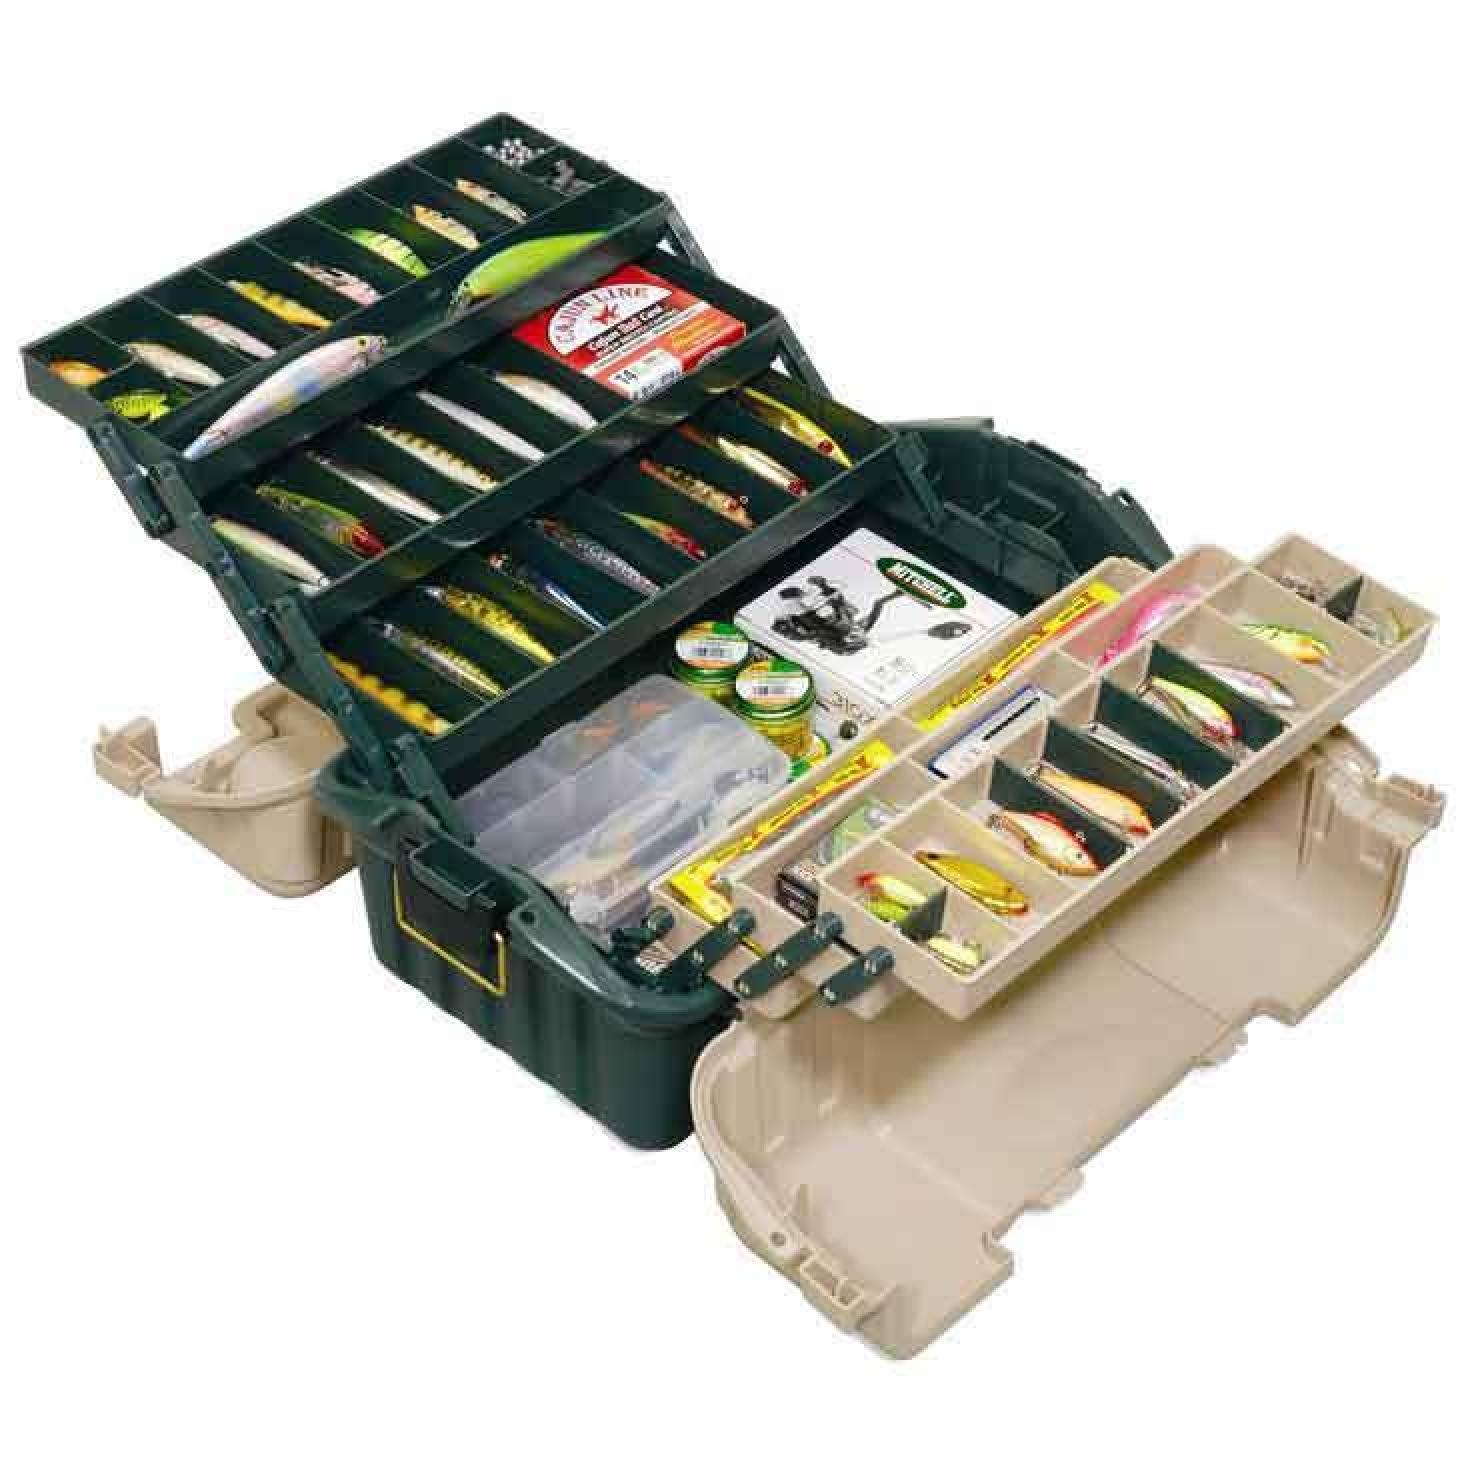 Plano Hip Roof Tackle Box